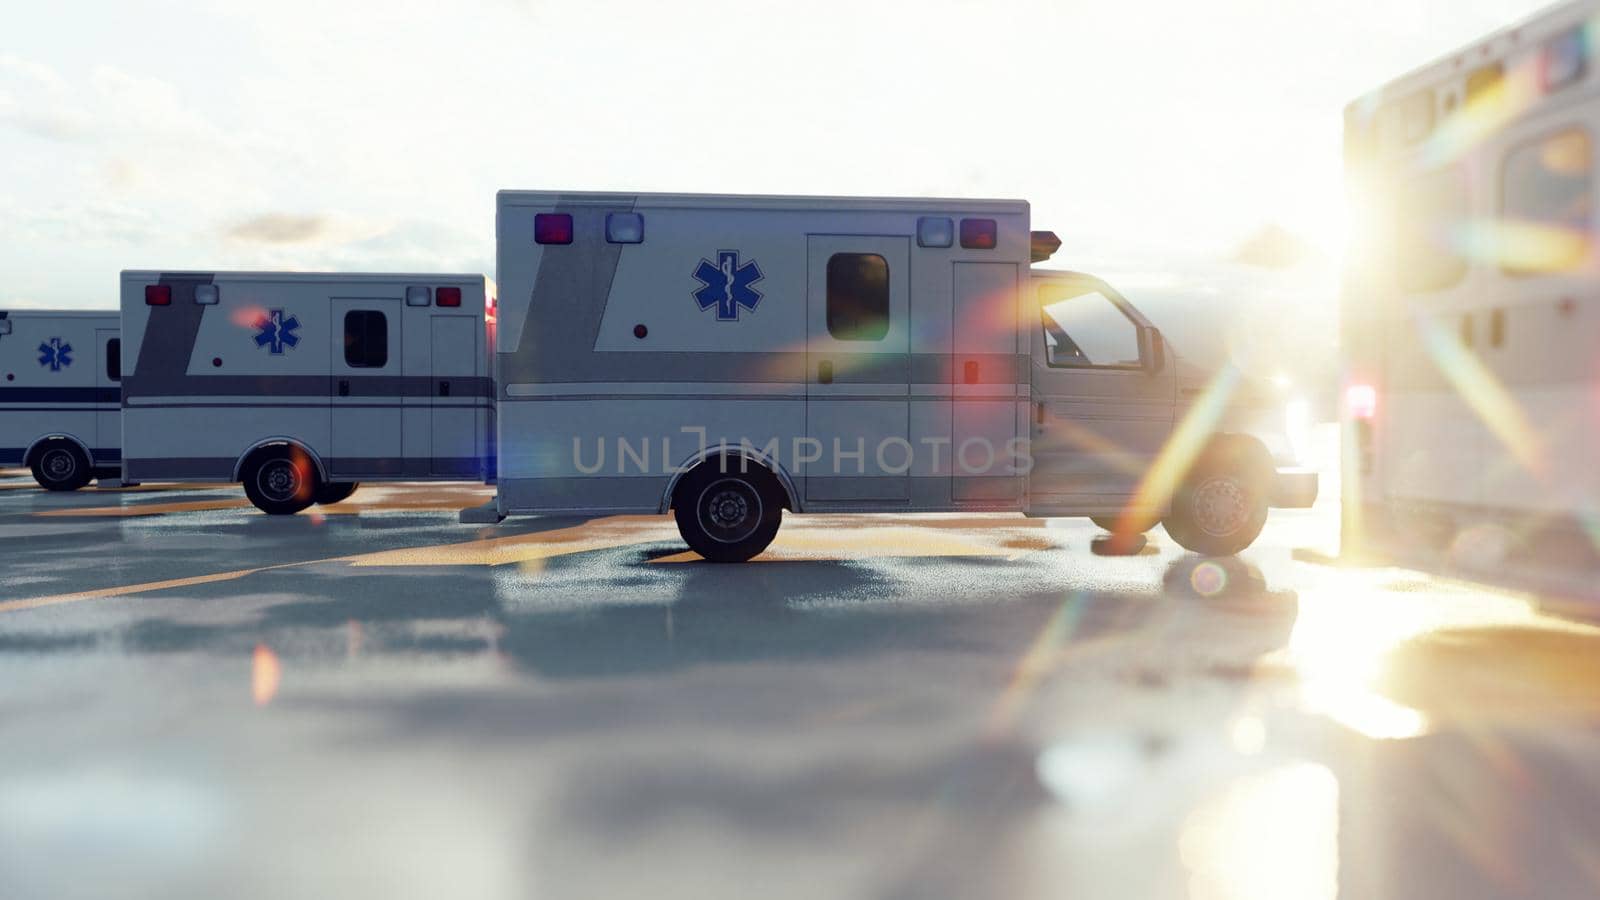 Several ambulances are waiting for a call. Concept of emergency medical services.